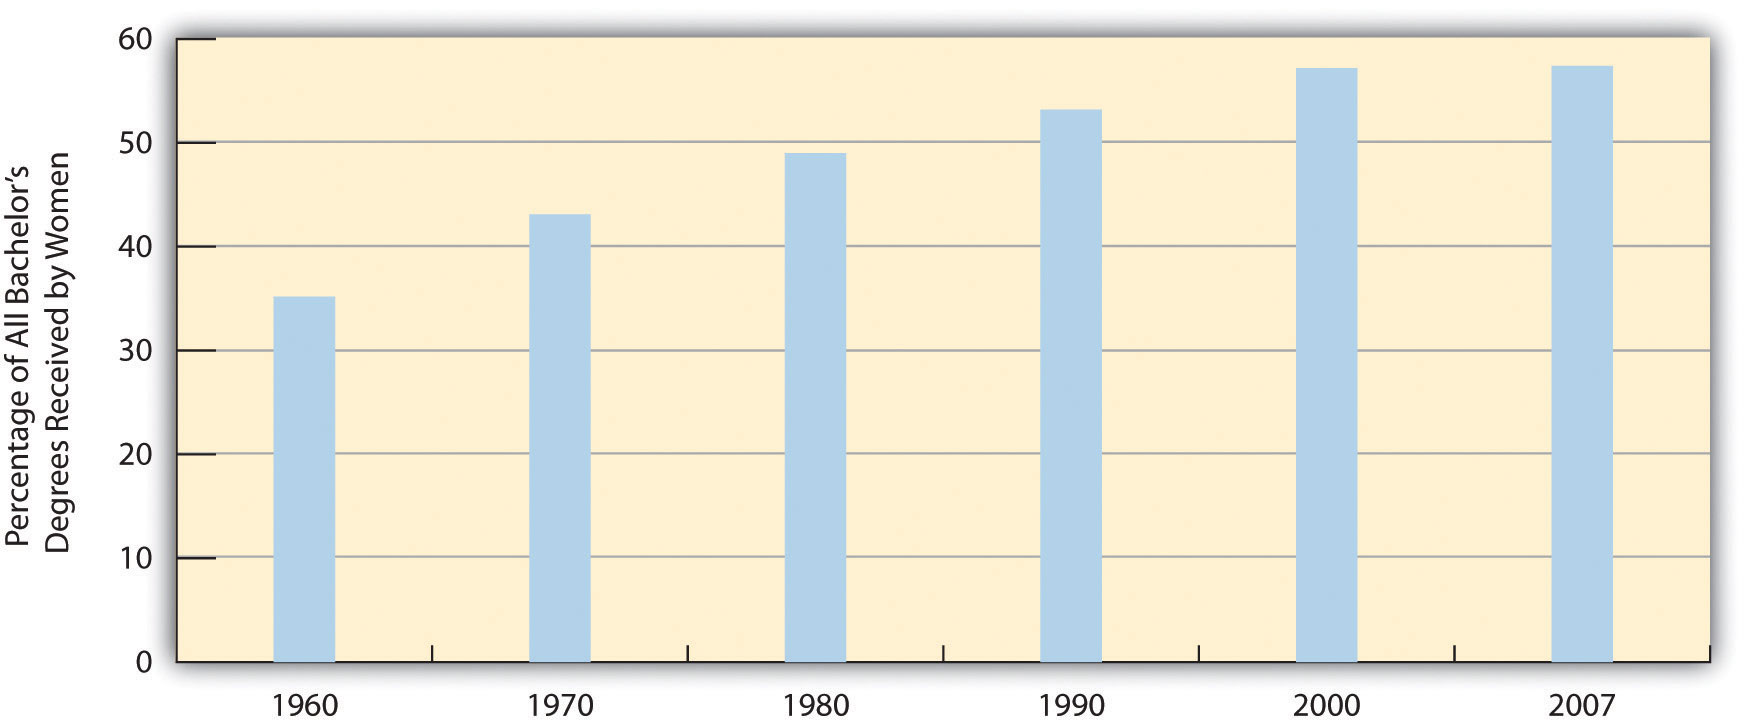 Percentage of All Bachelor's Degrees Received by Women. From 1960 to 2007 the percentage has risen from 35% to around 58%